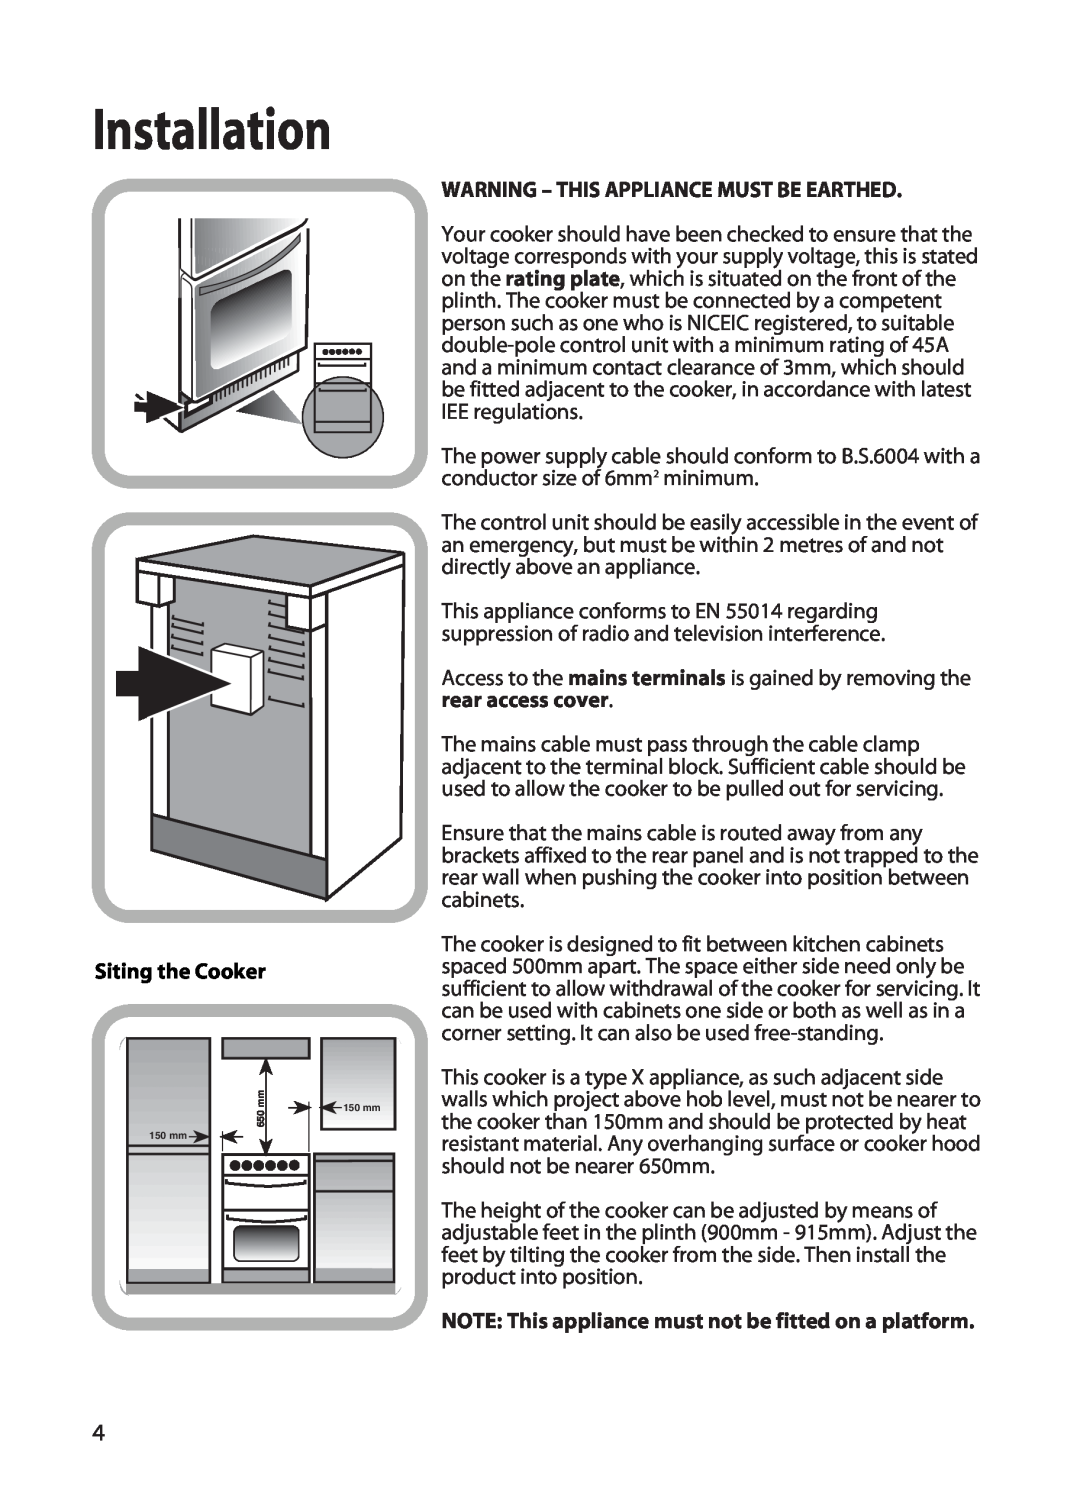 Hotpoint EW22 manual Installation, Warning - This Appliance Must Be Earthed, Siting the Cooker 